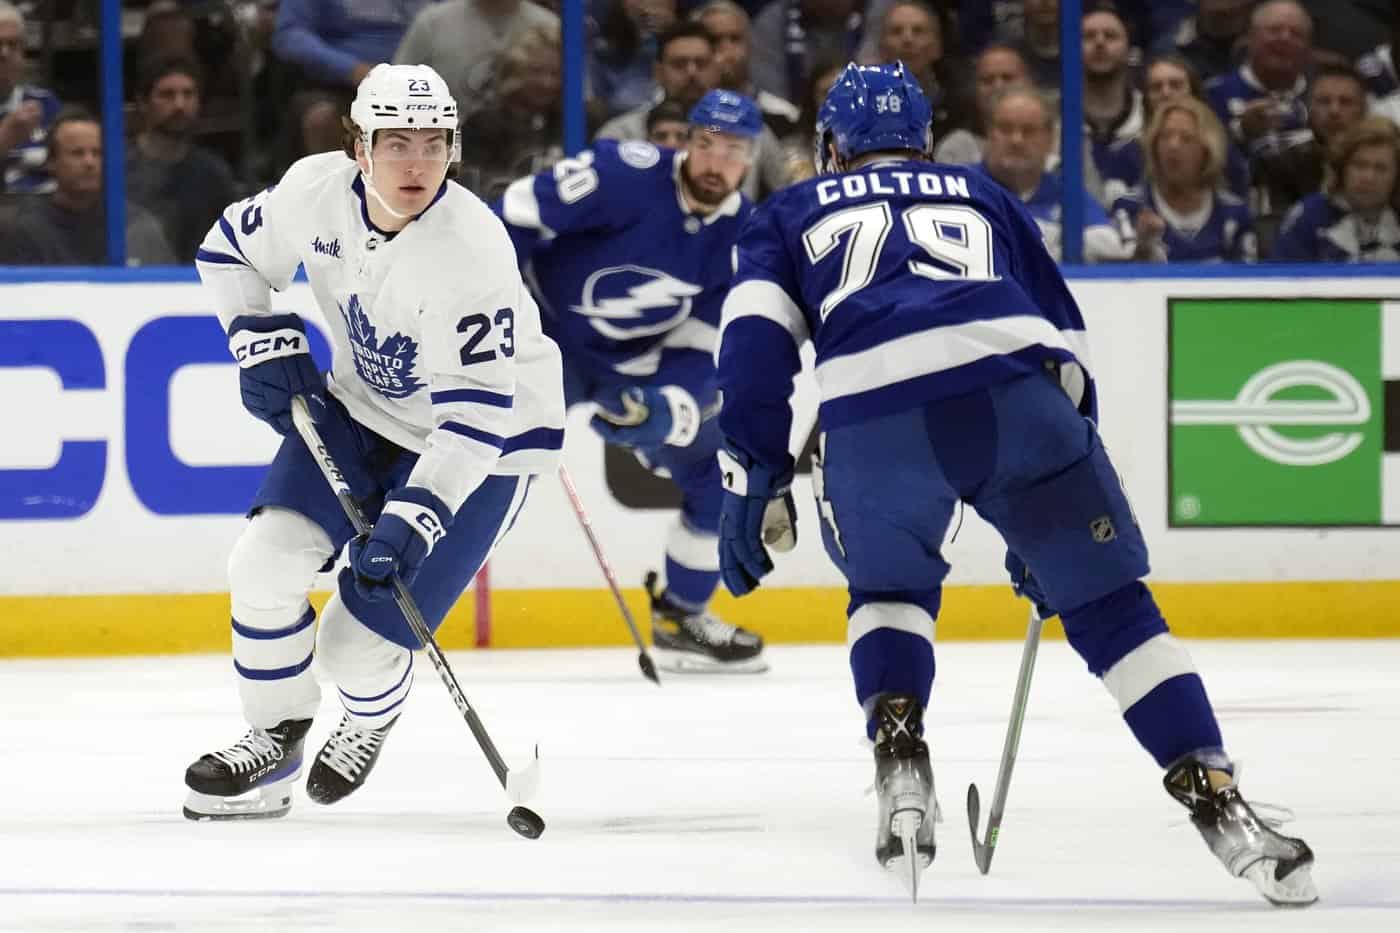 Watch Maple Leafs playoff action on the big screen in Brampton insauga